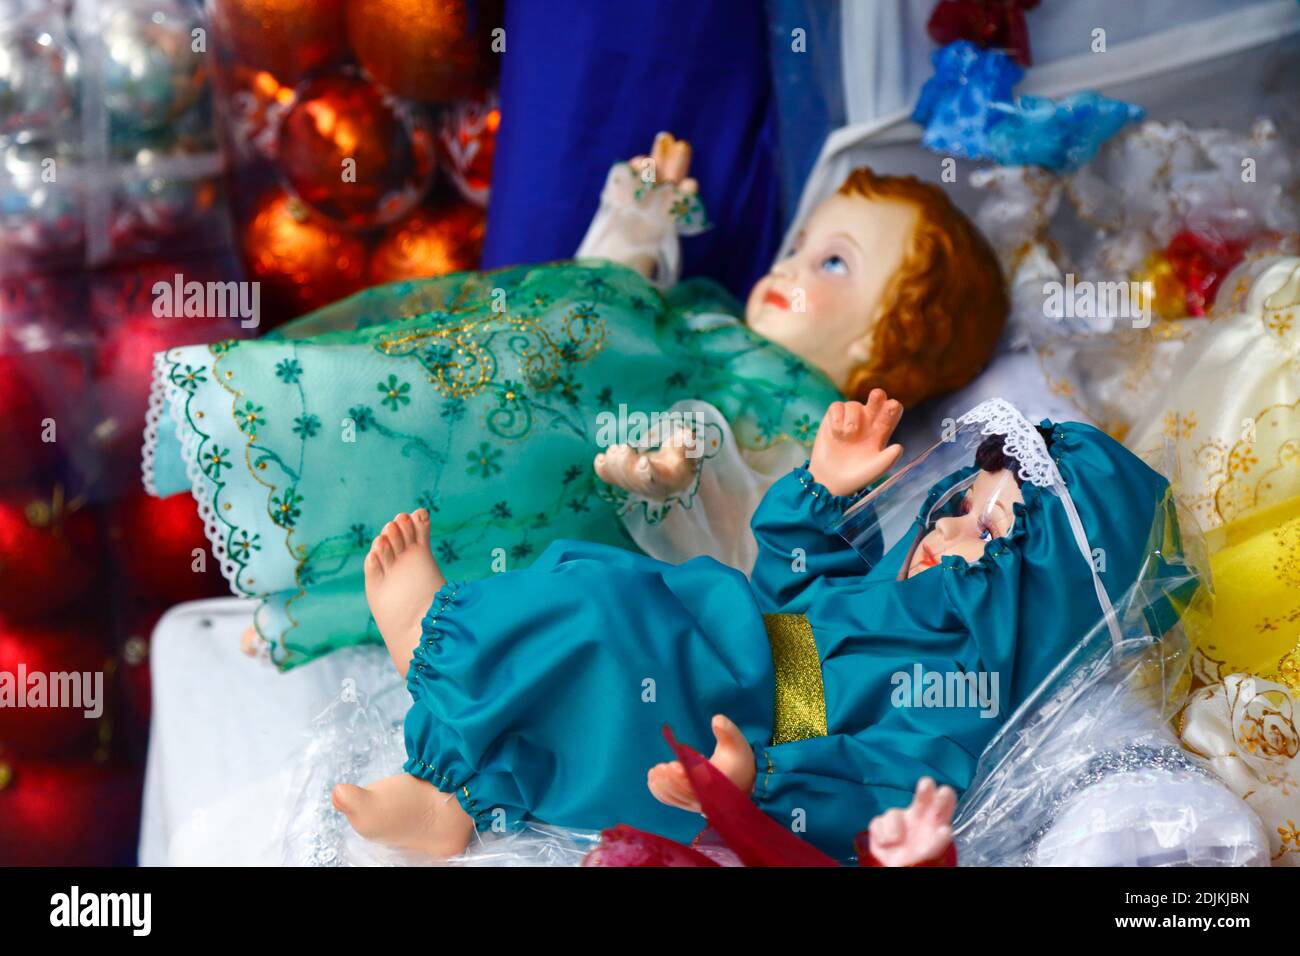 14th December 2020, LA PAZ, BOLIVIA: Baby Jesus figure (called Niño in Spanish) for nativity scenes wearing face mask and protective clothing against the covid 19 coronavirus on sale in a Christmas market. Nativity scenes are an important Christmas decoration in houses and public places in Latin America, and also Spain (where the tradition comes from).  Large numbers of figurines for nativity scenes are sold in Christmas markets; niños wearing protection against the covid 19 coronavirus are a new option this year alongside traditionally dressed niños as a result of the pandemic. Stock Photo